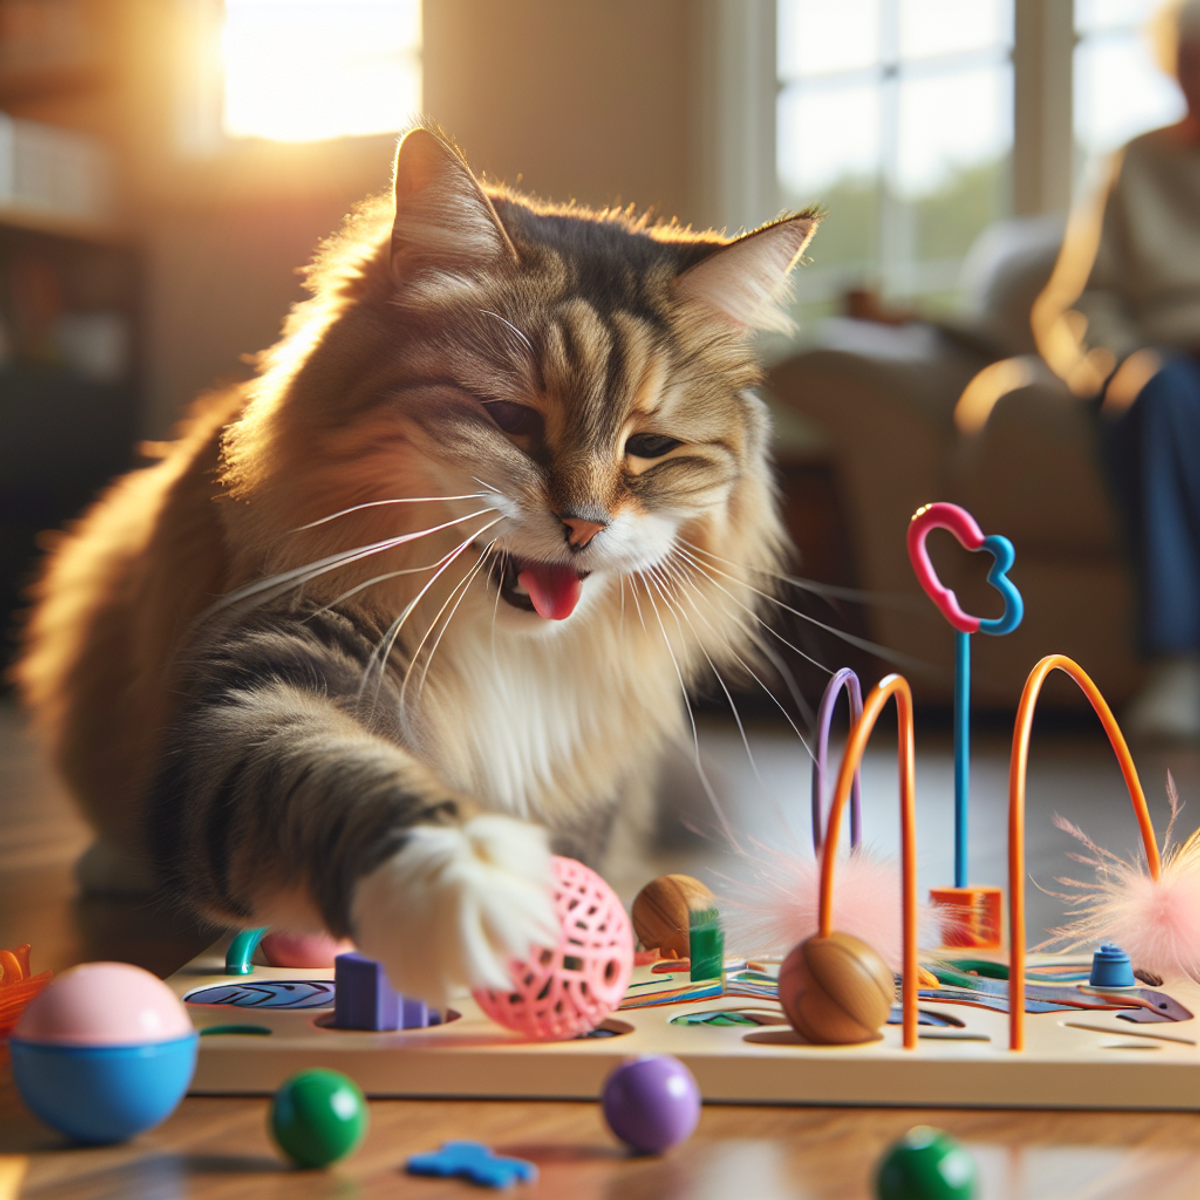 An elderly tabby cat plays with a feather wand toy in a sunlit room, surrounded by various interactive toys like ball tracks and treat-dispensing puzz